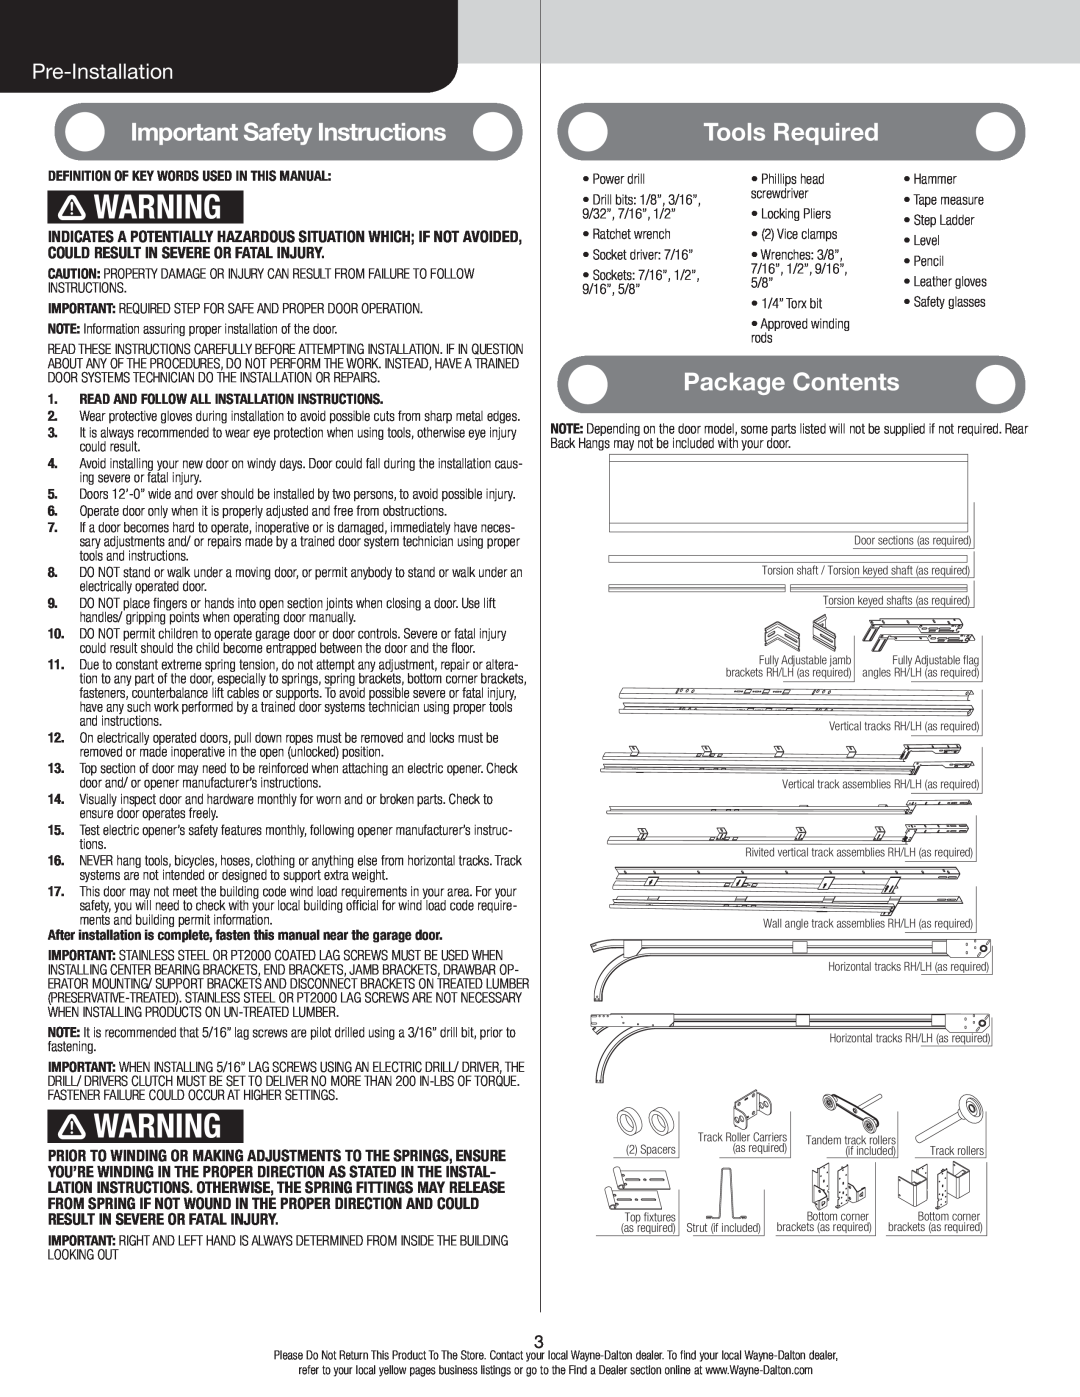 Wayne-Dalton 105/110, 310/311 Important Safety Instructions, Tools Required, Package Contents, Pre-Installation 